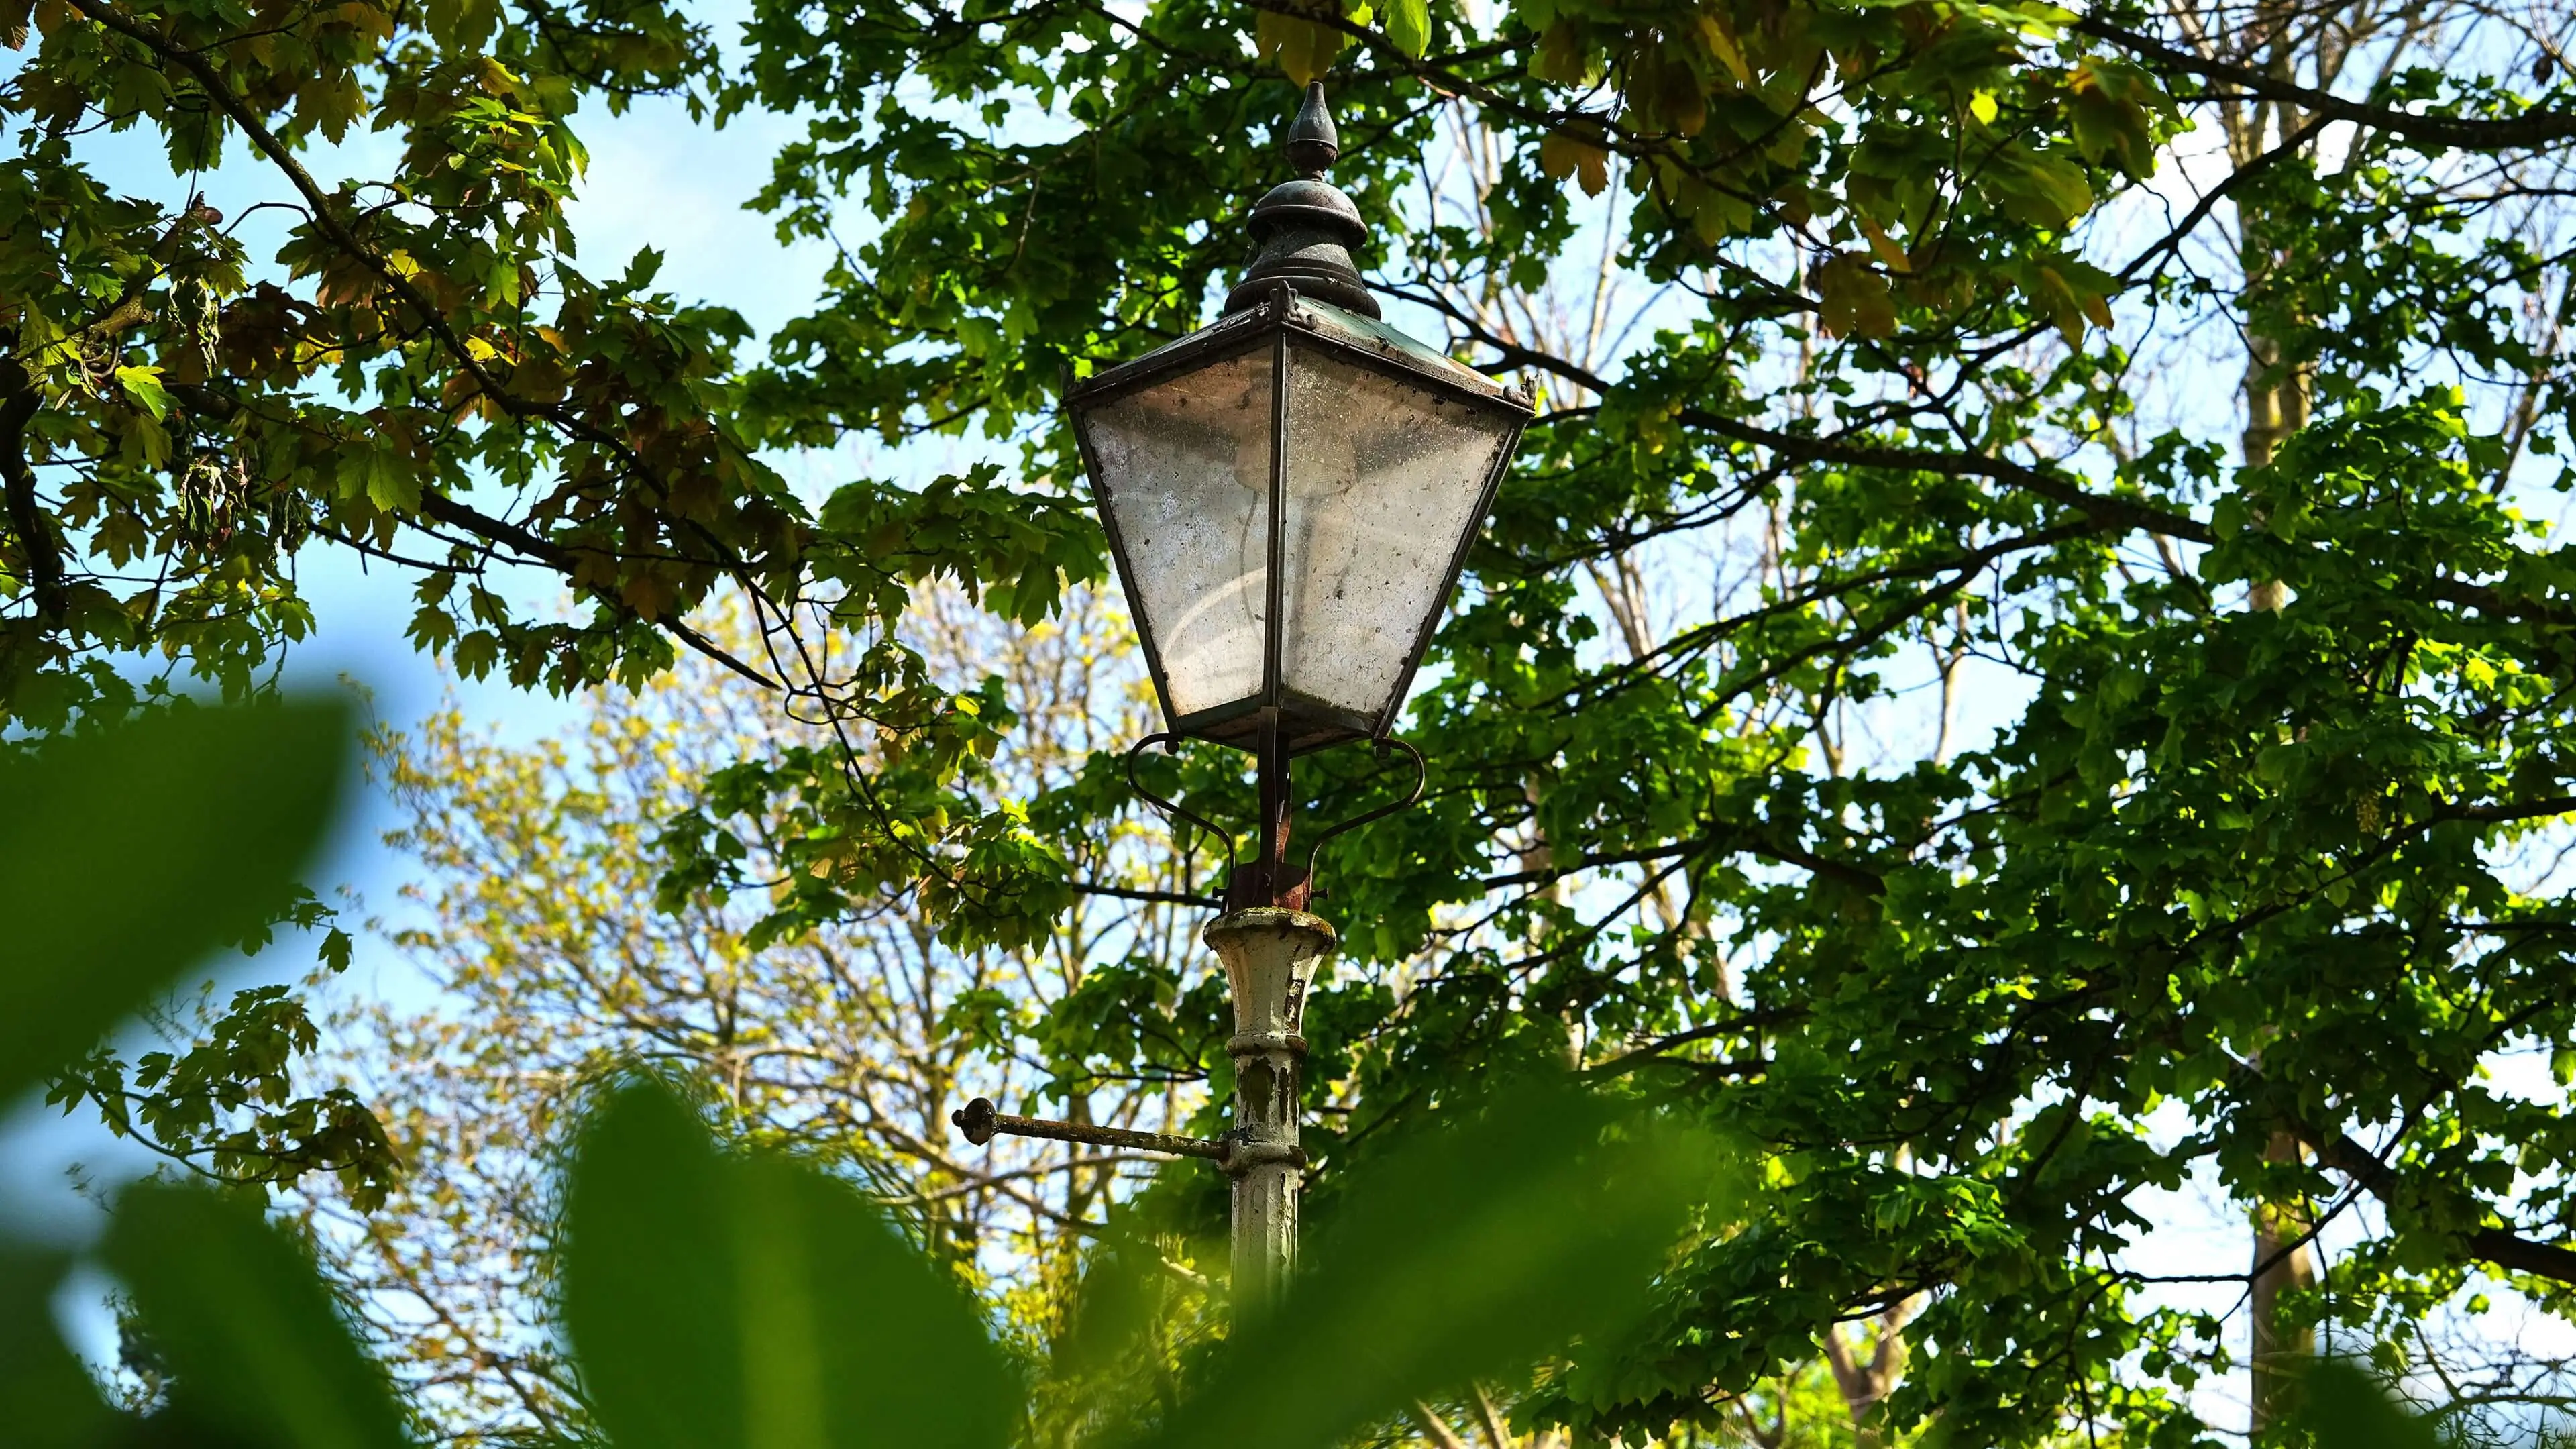 An old Victorian lamppost nestled in some trees